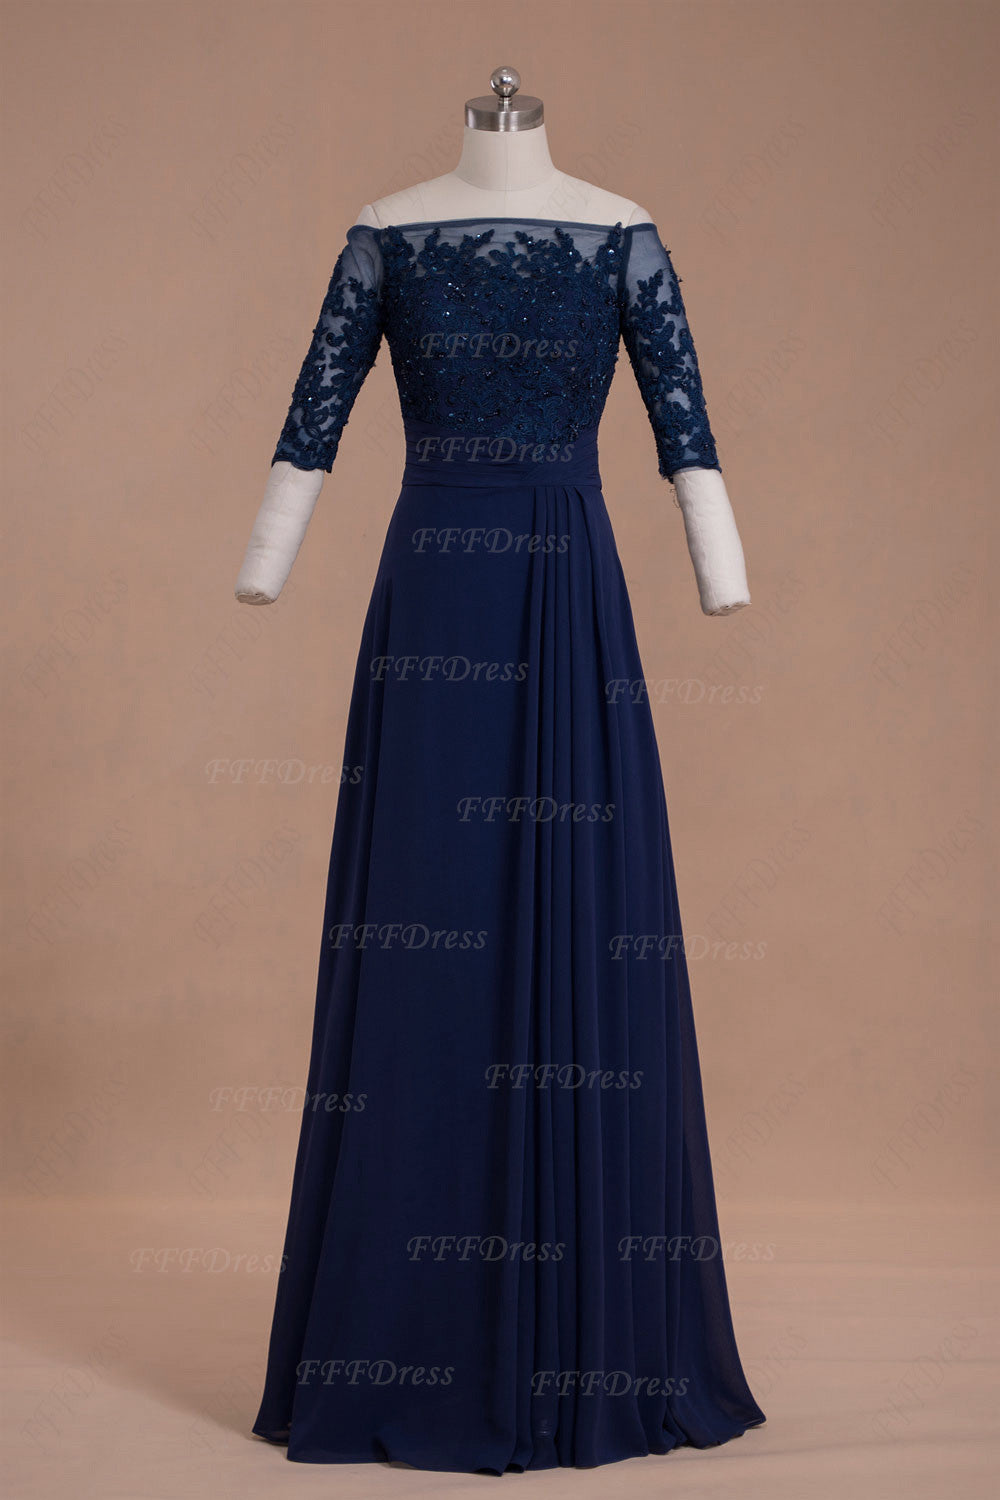 Off the shoulder lace navy blue mother of the bride dresses with sleeves